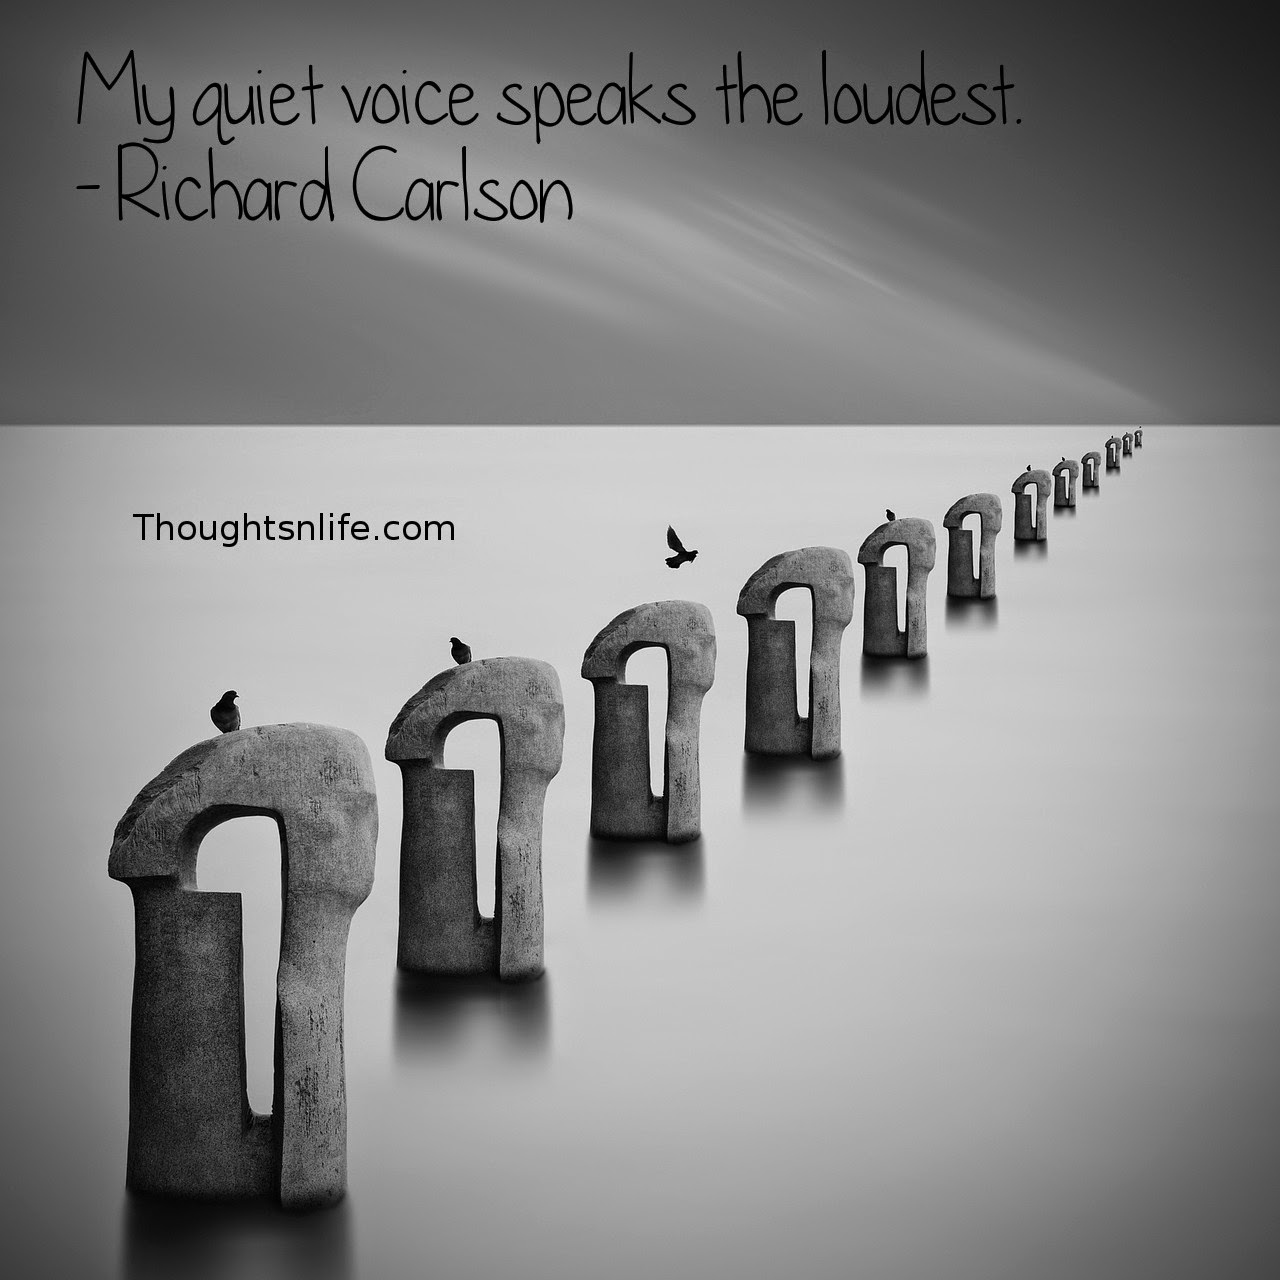 Thoughtsnlife.com: My quiet voice speaks the loudest. - Richard Carlson